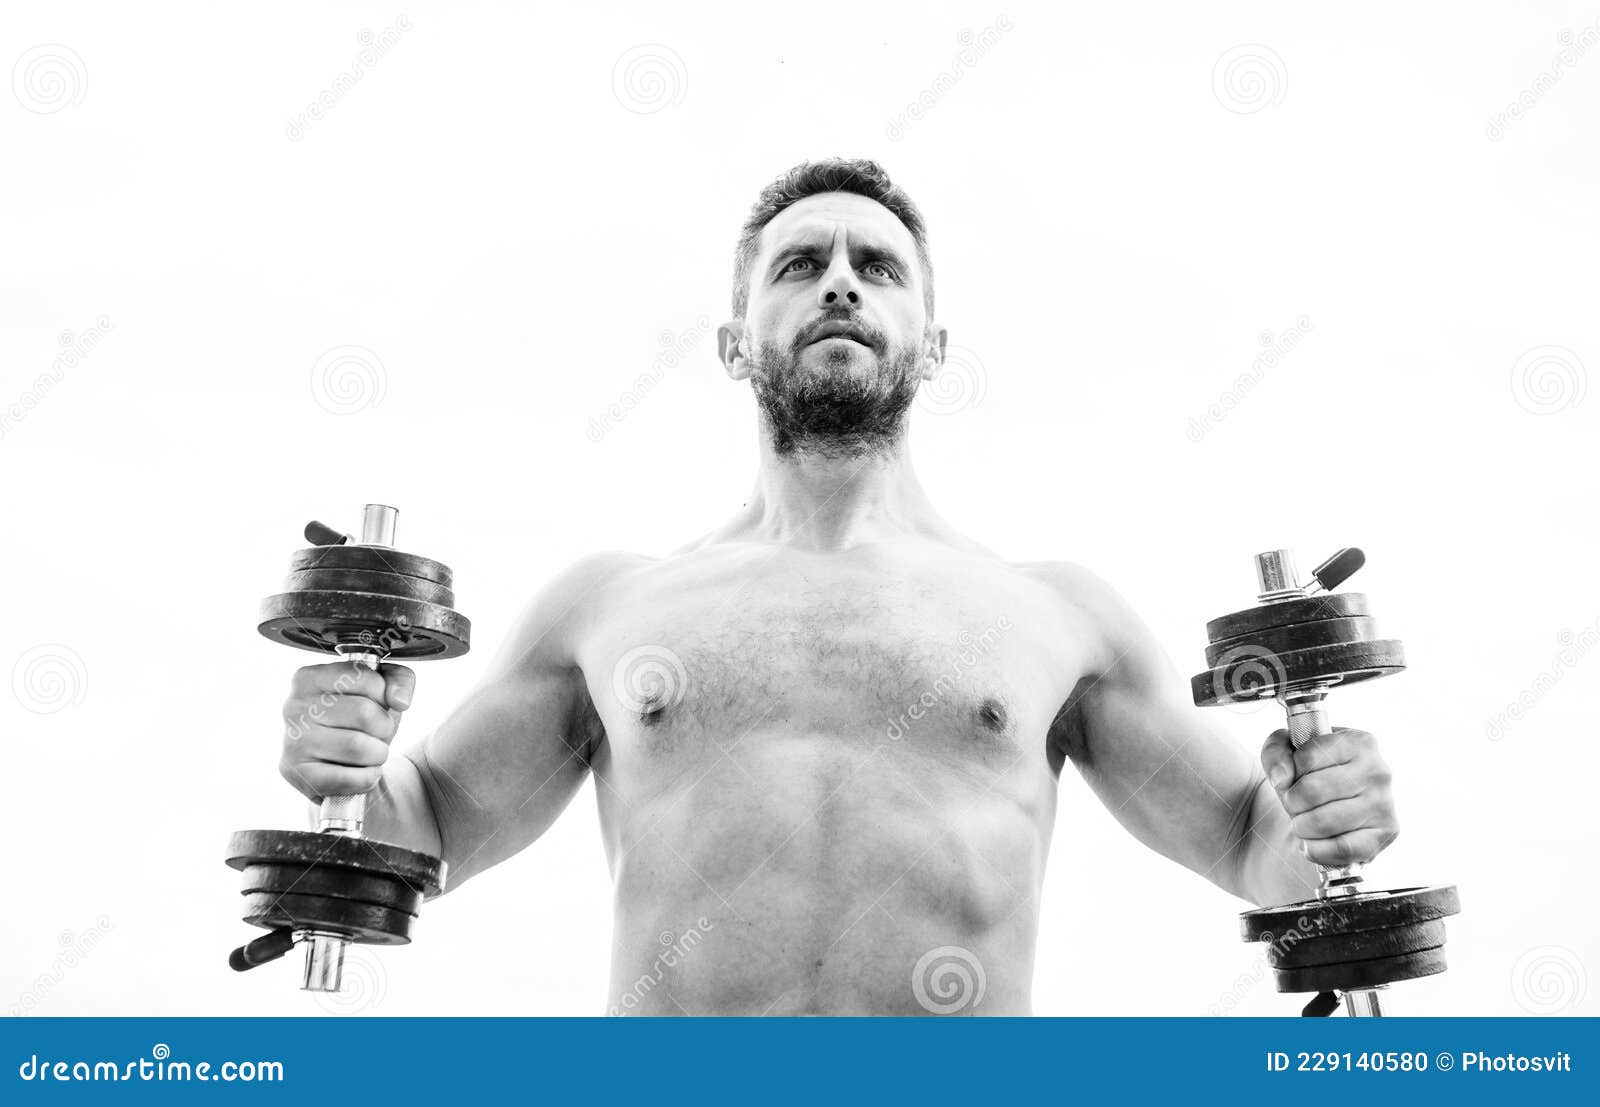 Best Muscular Man Exercising Barbell. and Sport Equipment Stock Photo - Image of clothes, morning: 229140580